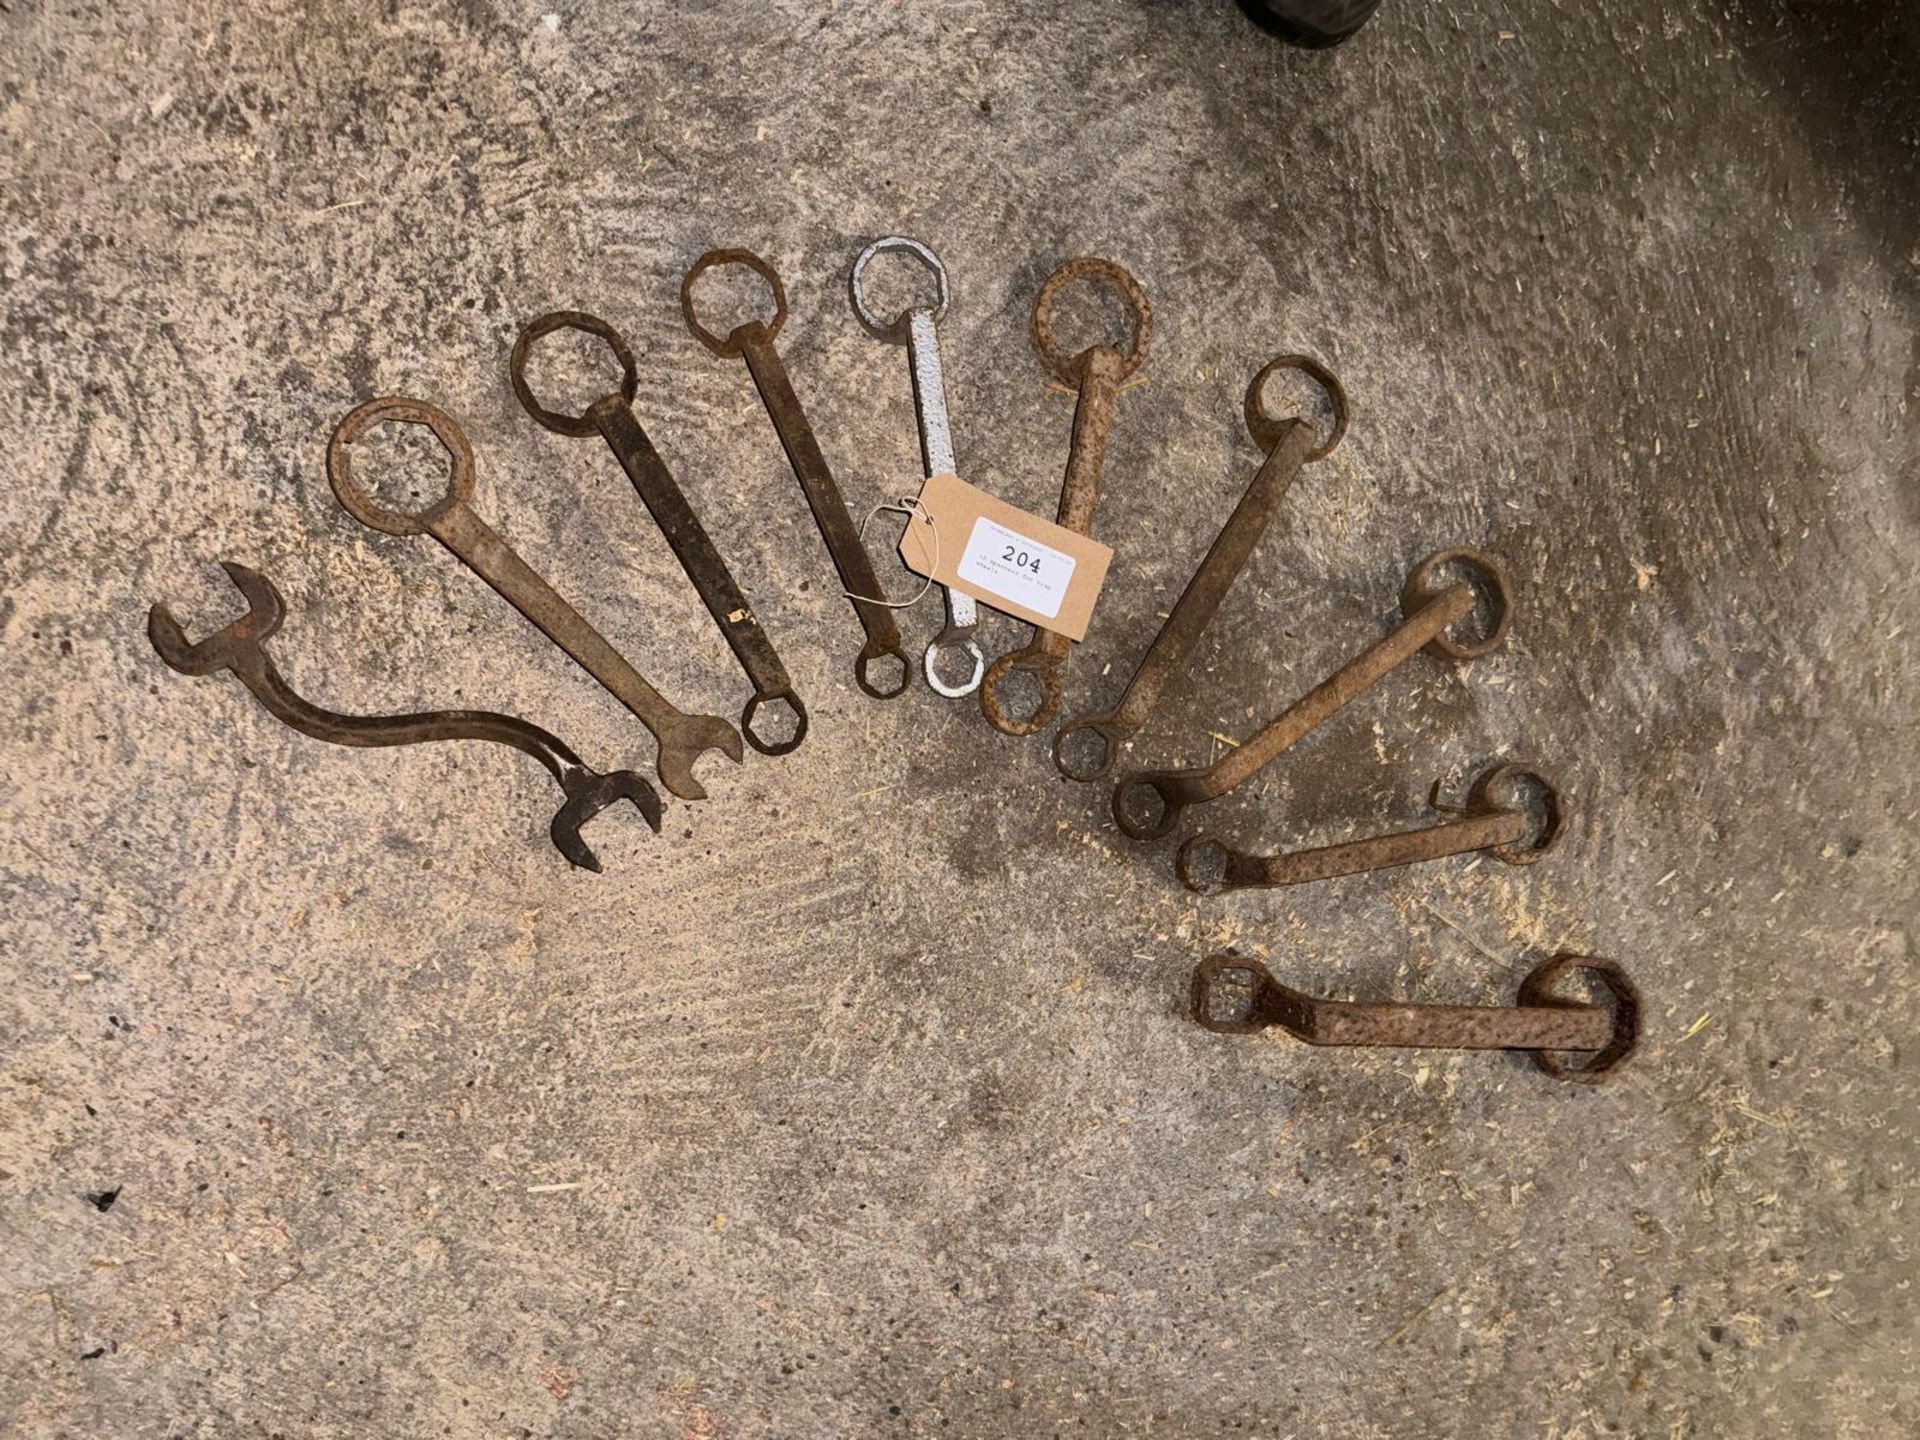 10 carriage wheel spanners